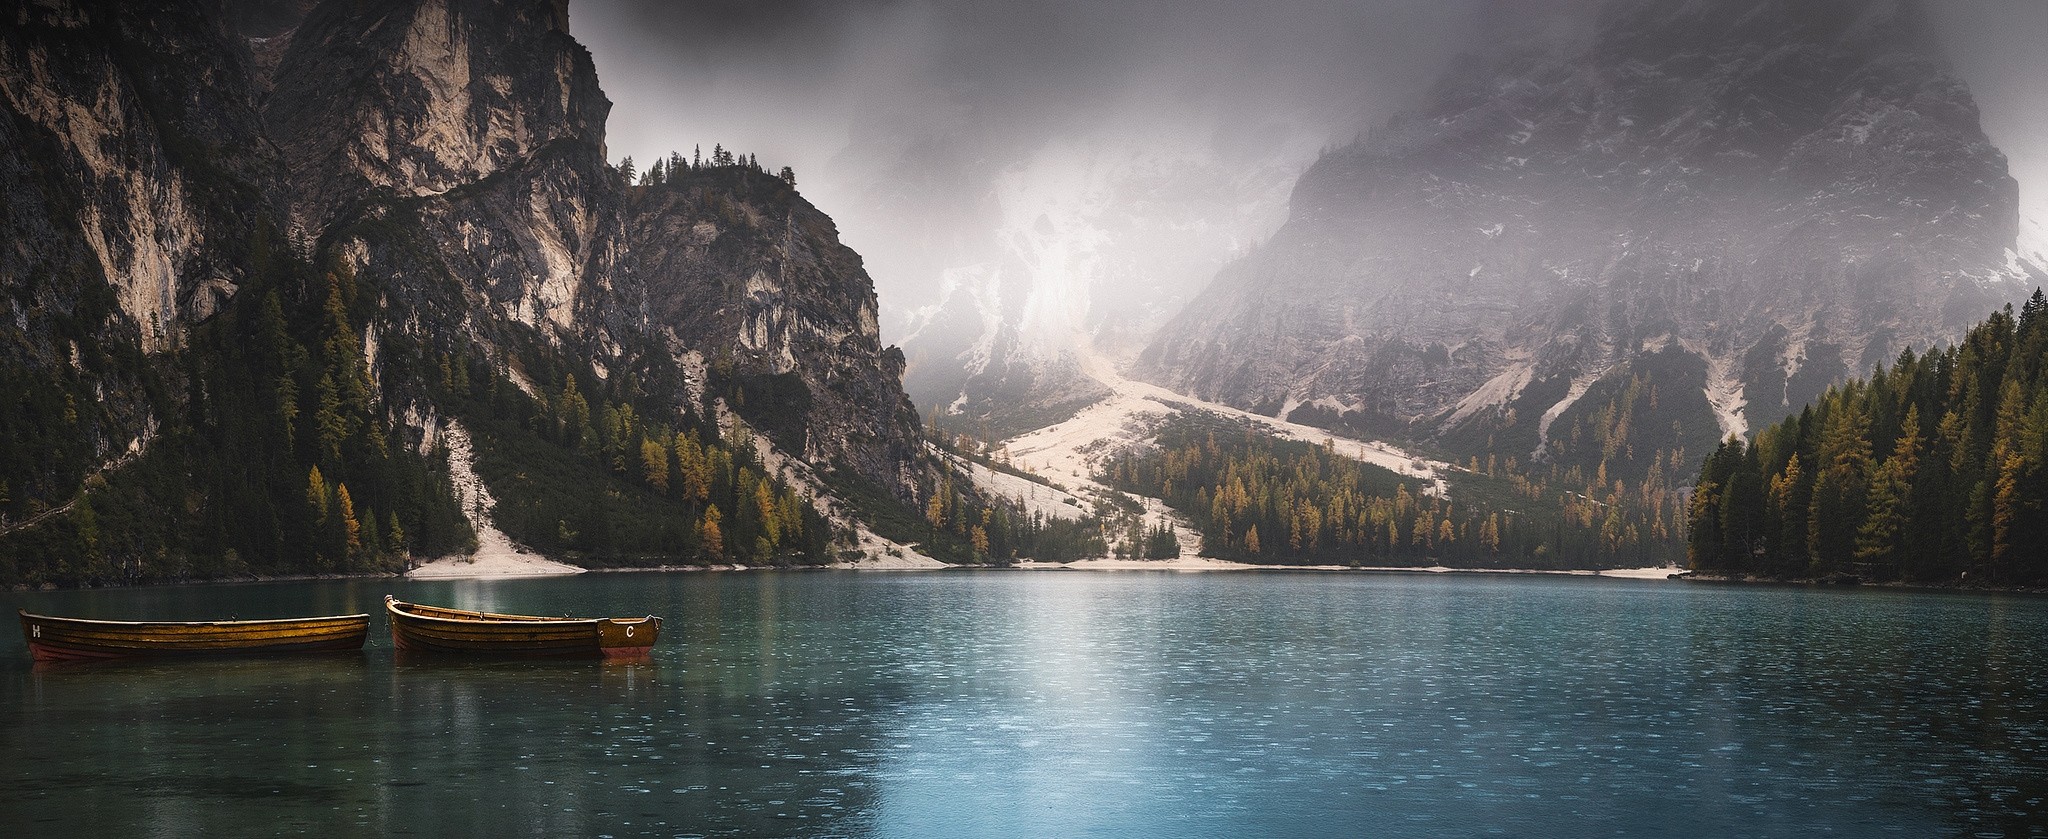 General 2048x839 nature landscape panorama lake fall mountains boat rain mist forest pine trees Alps Pragser Wildsee water reflection clouds trees ultrawide